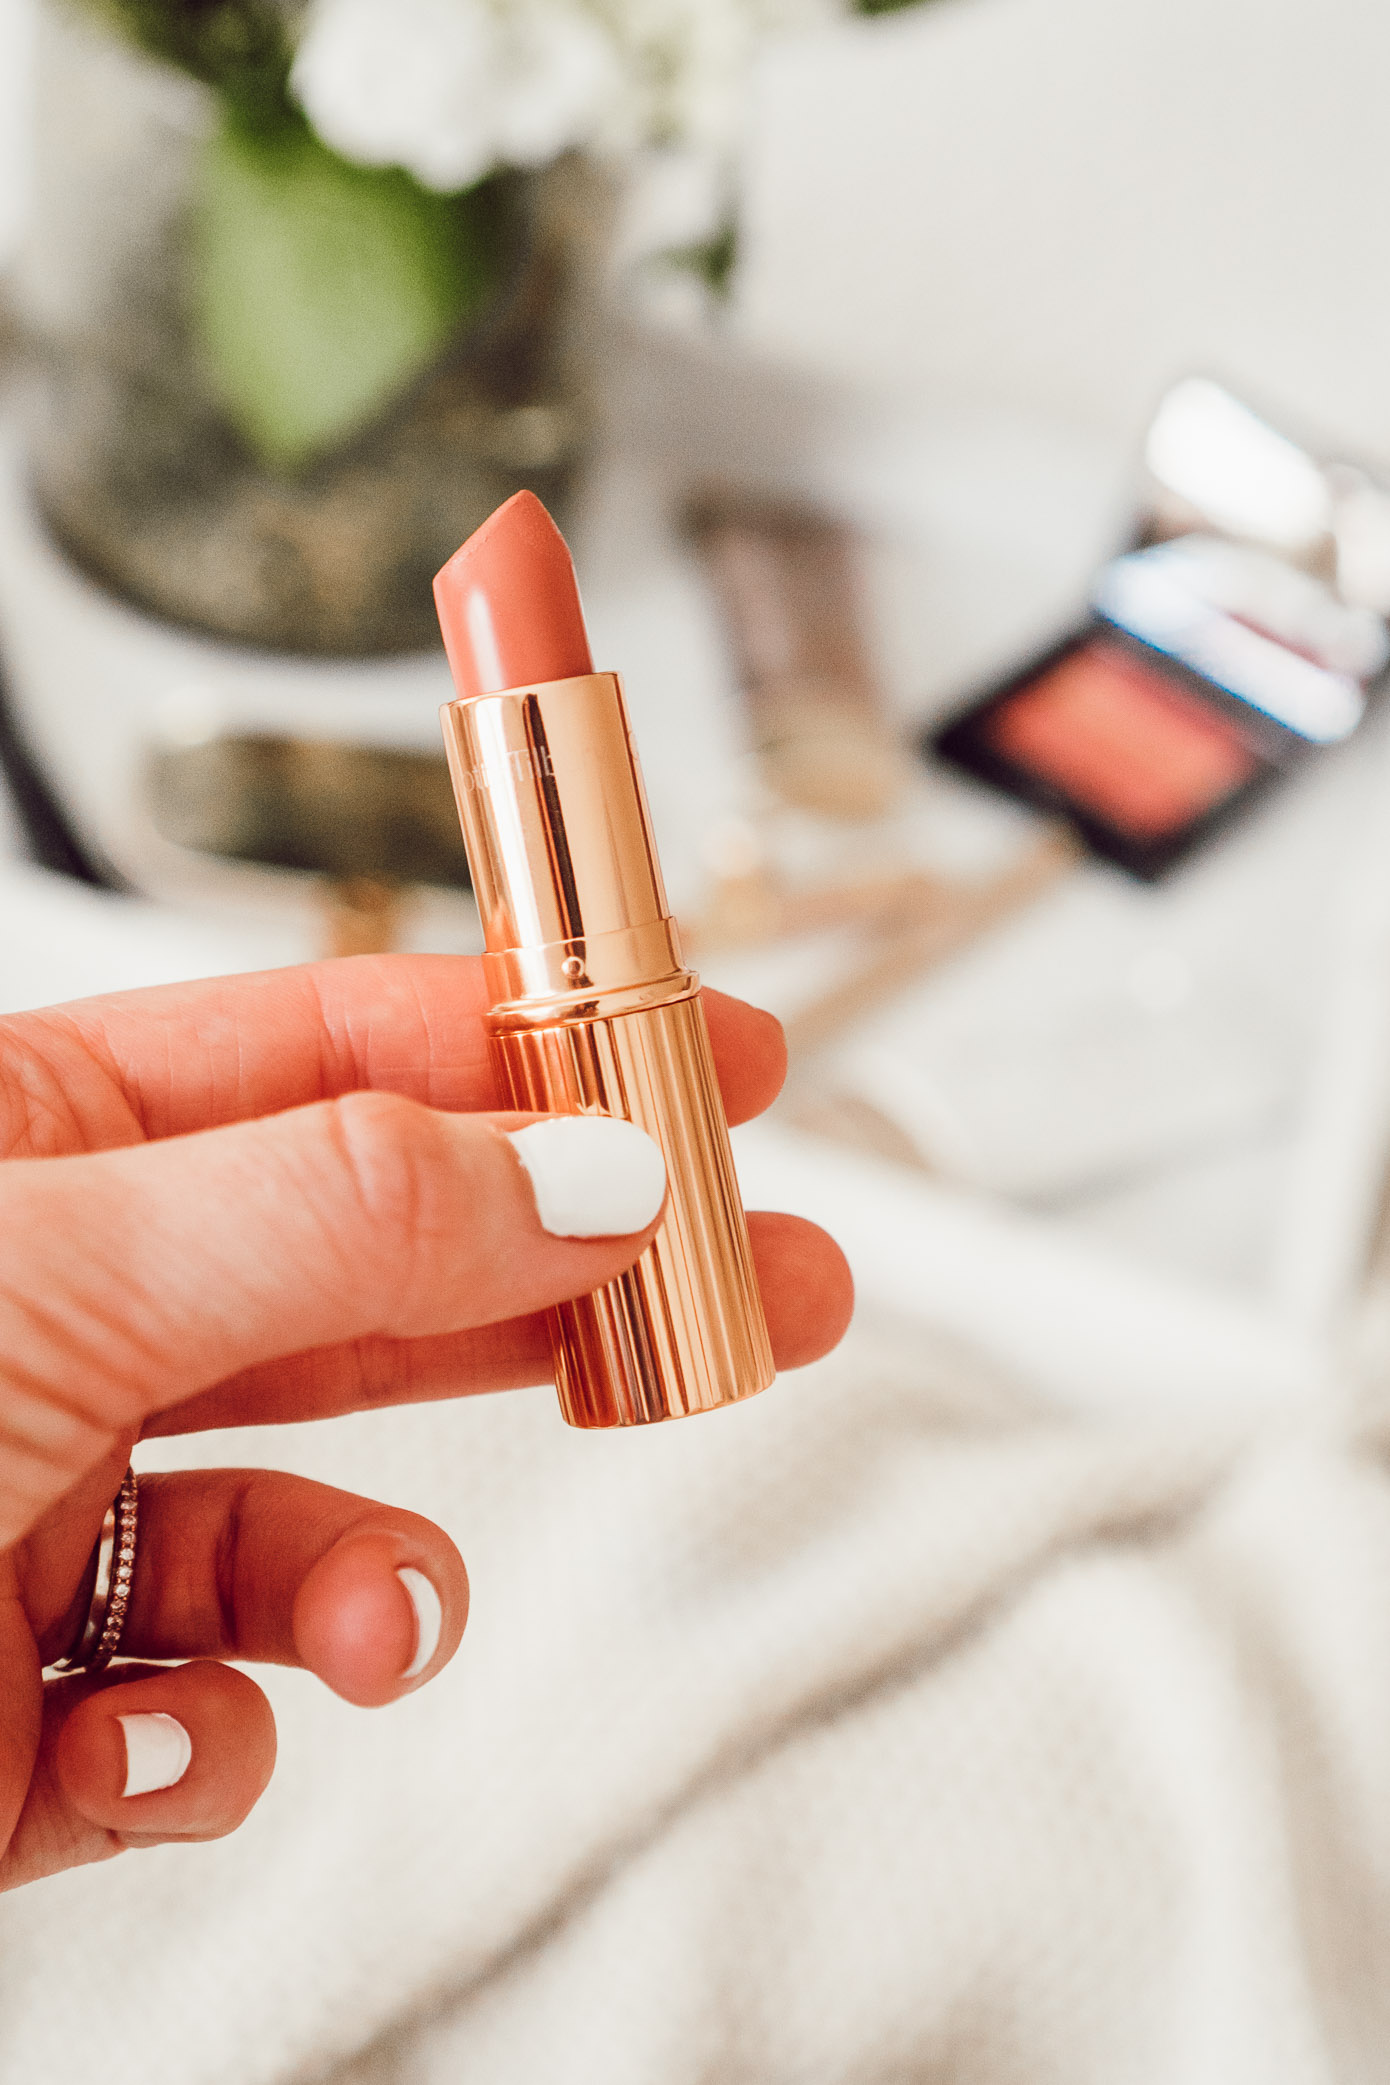 Summer Everyday Makeup | The Perfect Nude Lipstick for Summer 2018 | Louella Reese Life & Style Blog #summermakeup #everydaymakeup